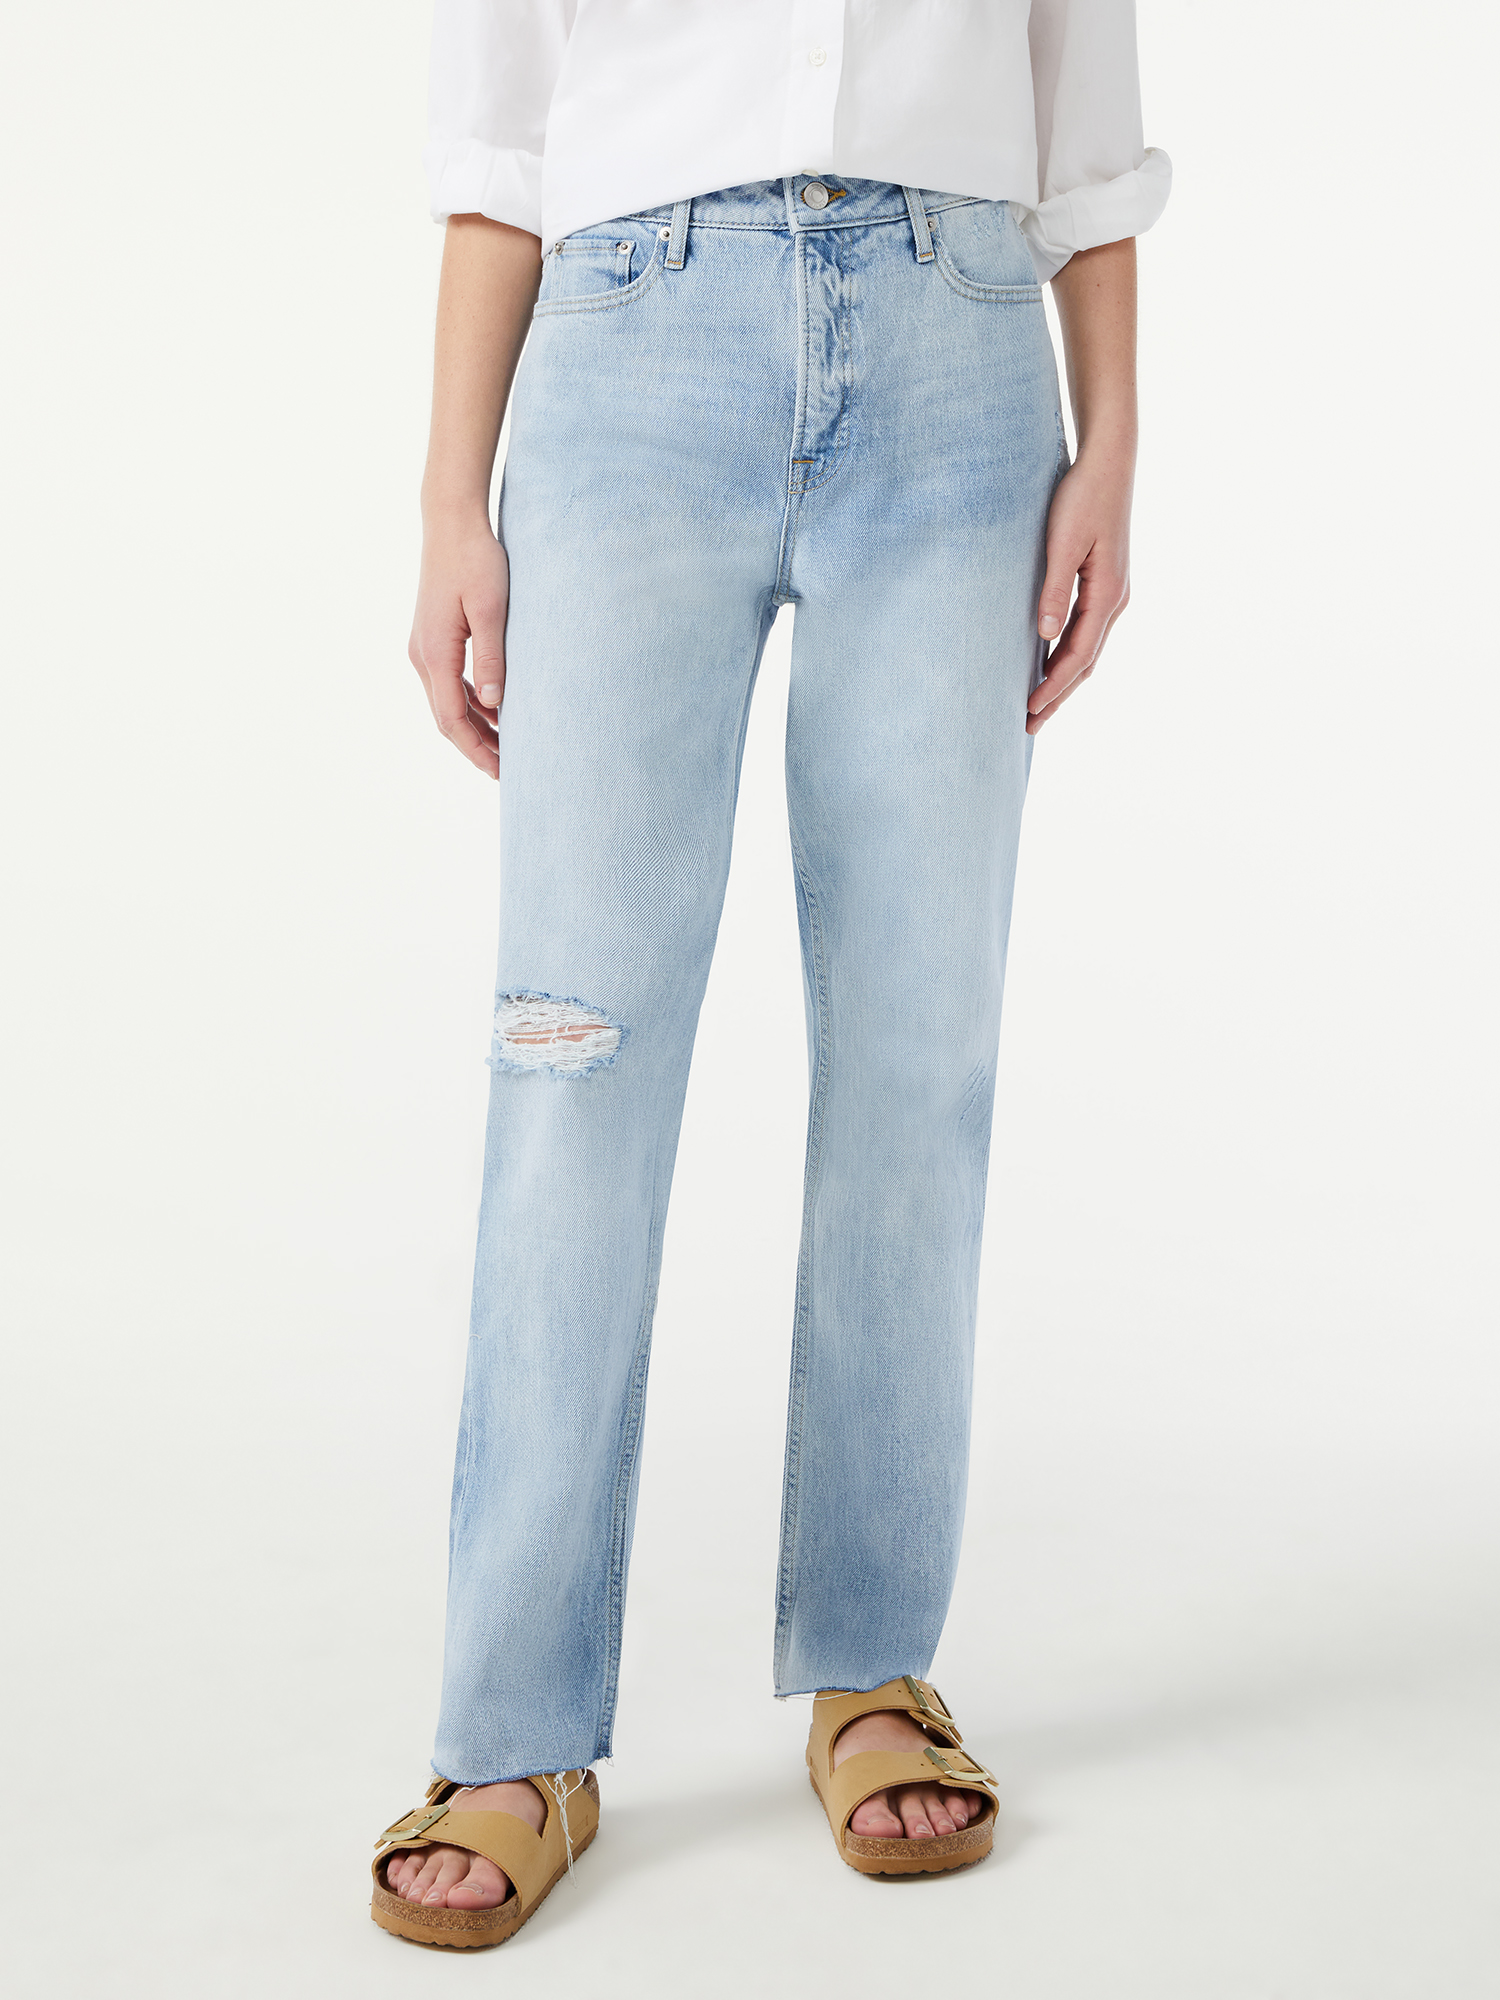 Free Assembly Women's Super High Rise Straight Jeans - image 1 of 5